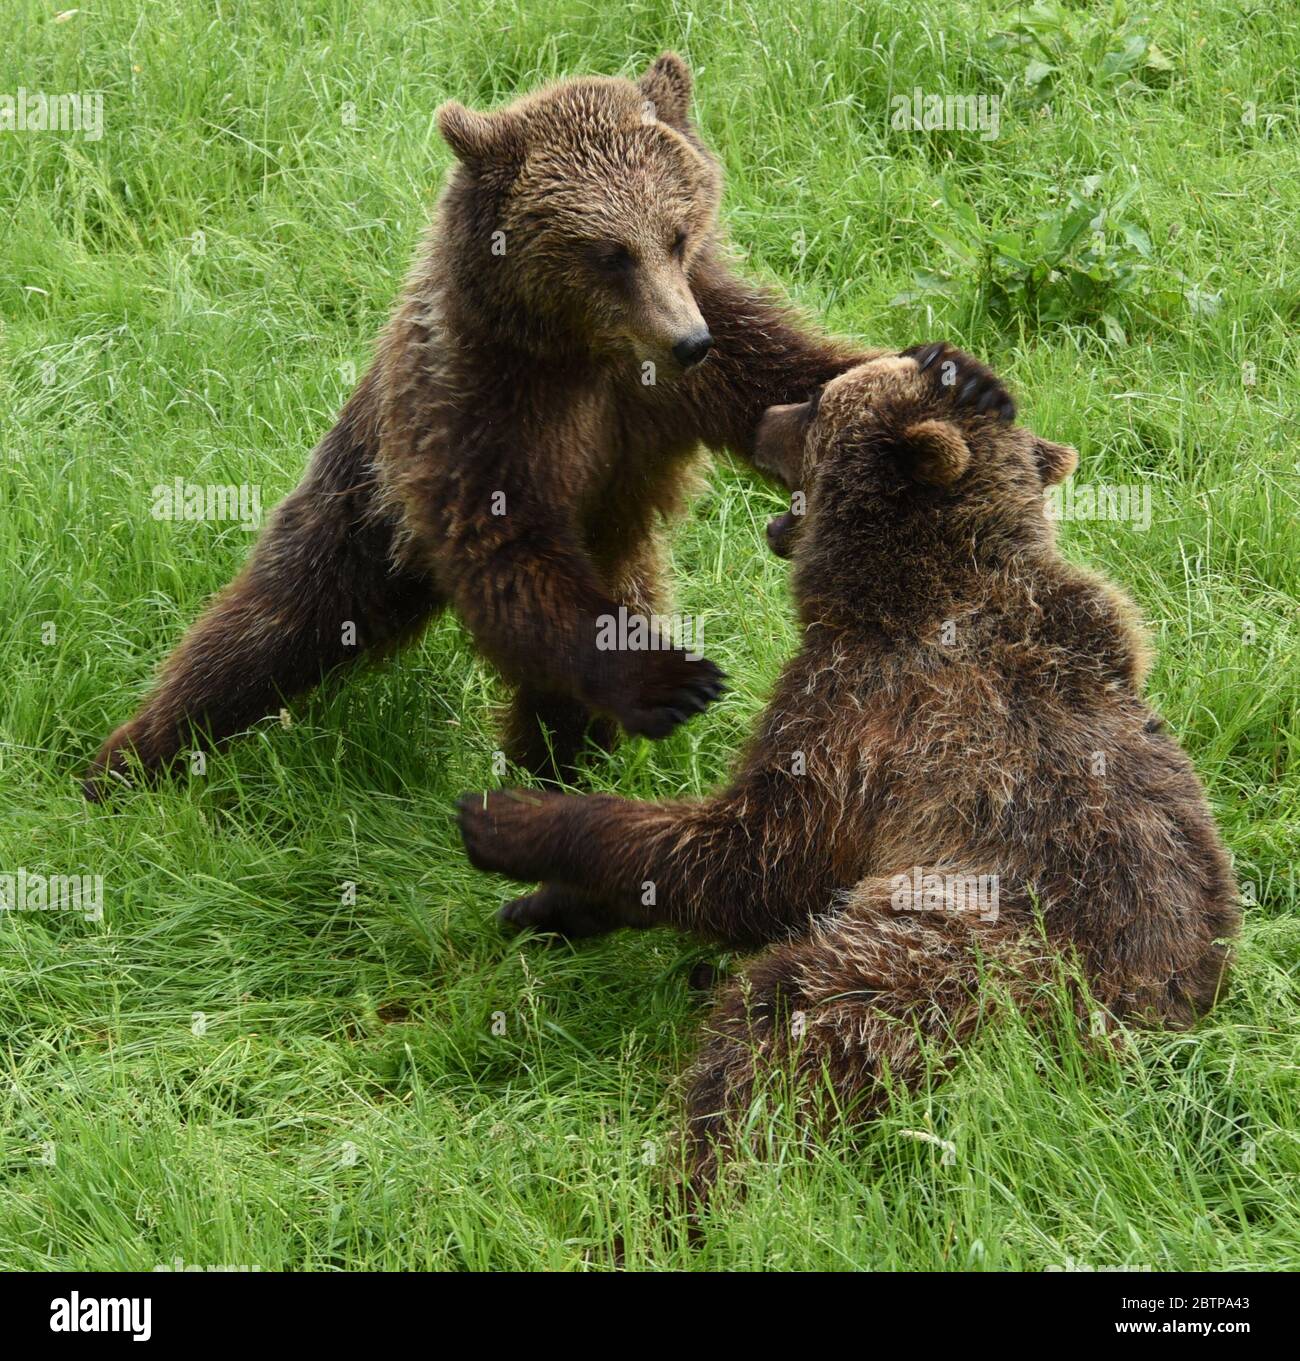 Bears fighting at Whipsnade Zoo Stock Photo